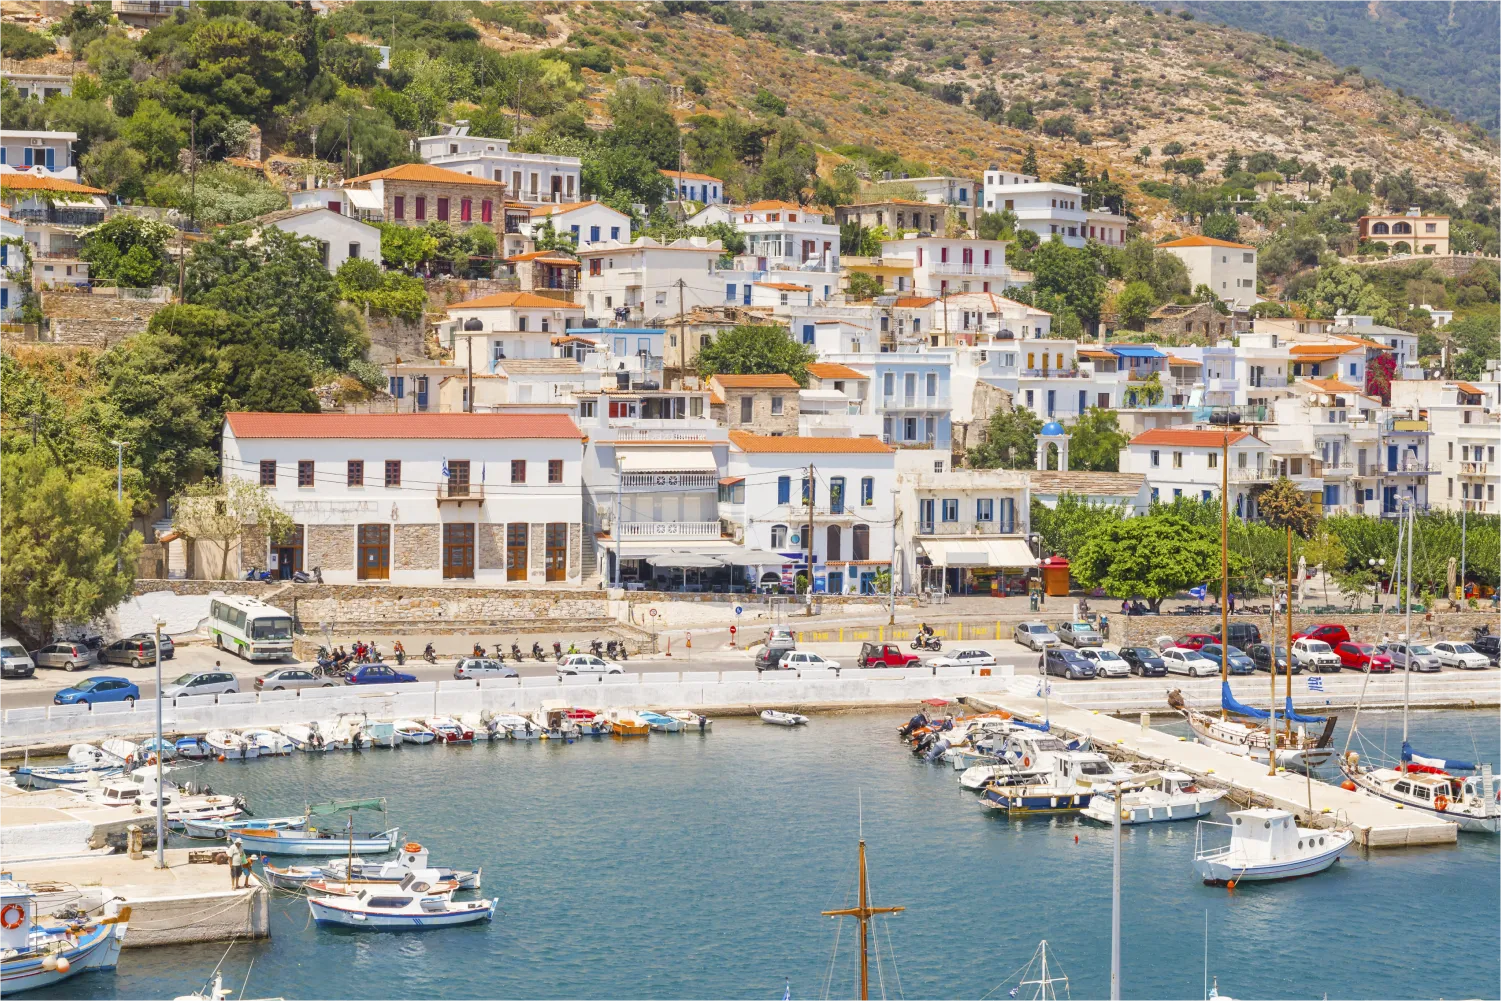 View of the village of Agios Kirikos and its picturesque port